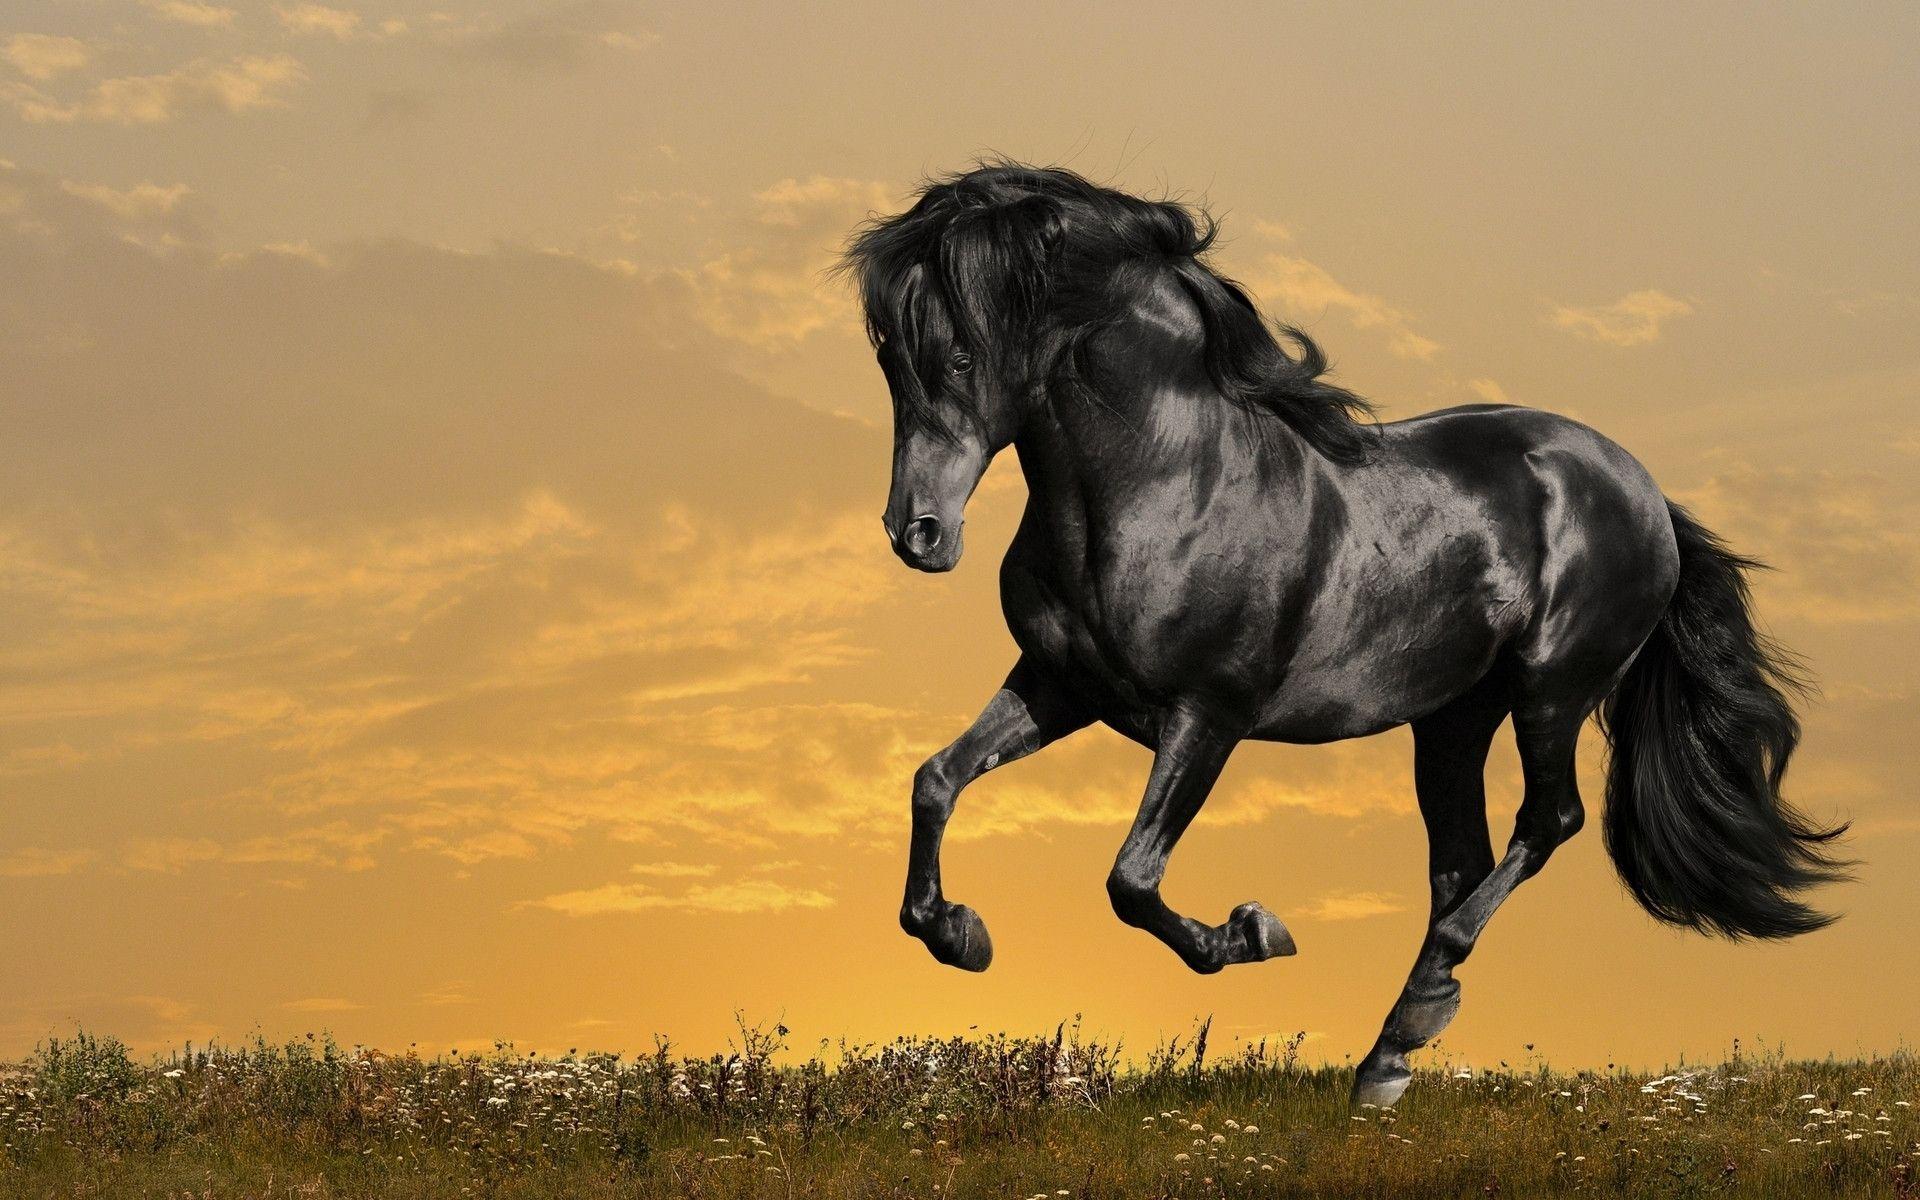 Arabian Horse Full HD, HDTV, 1080p 16:9 Wallpapers, HD Arabian Horse  1920x1080 Backgrounds, Free Images Download